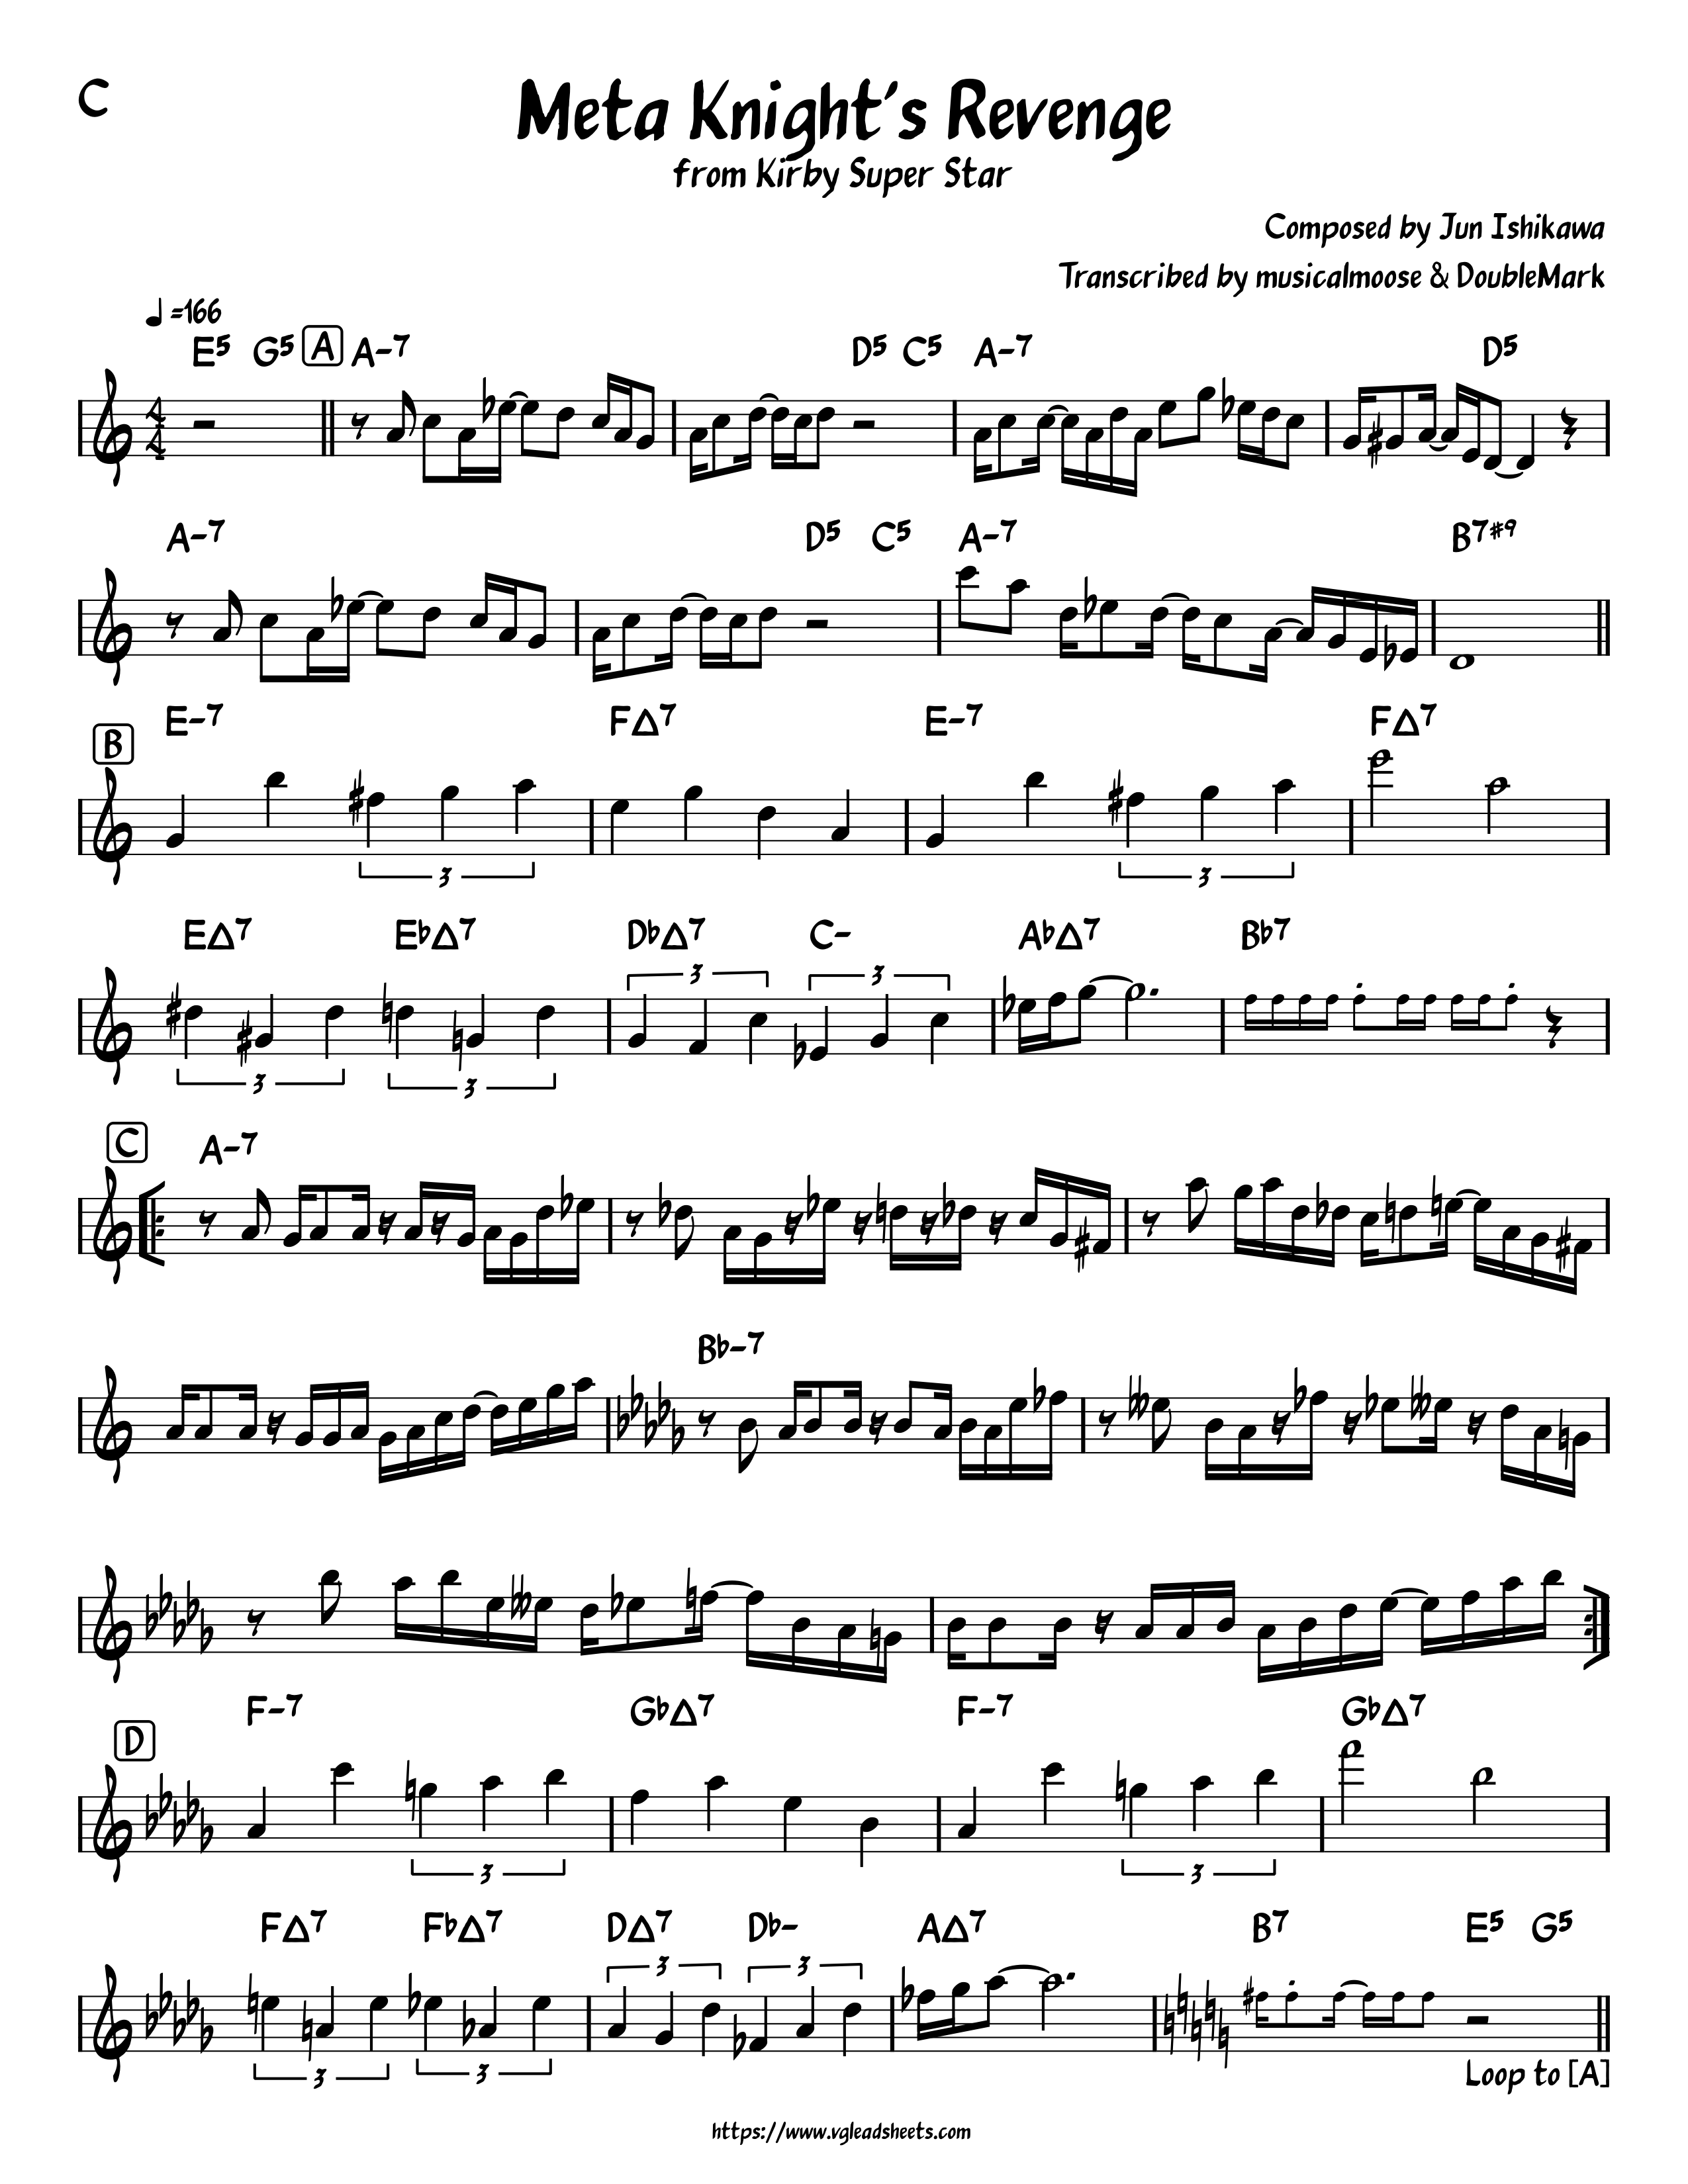 Kirby Super Star - Meta Knight's Revenge  - Lead Sheets  for Video Game Music